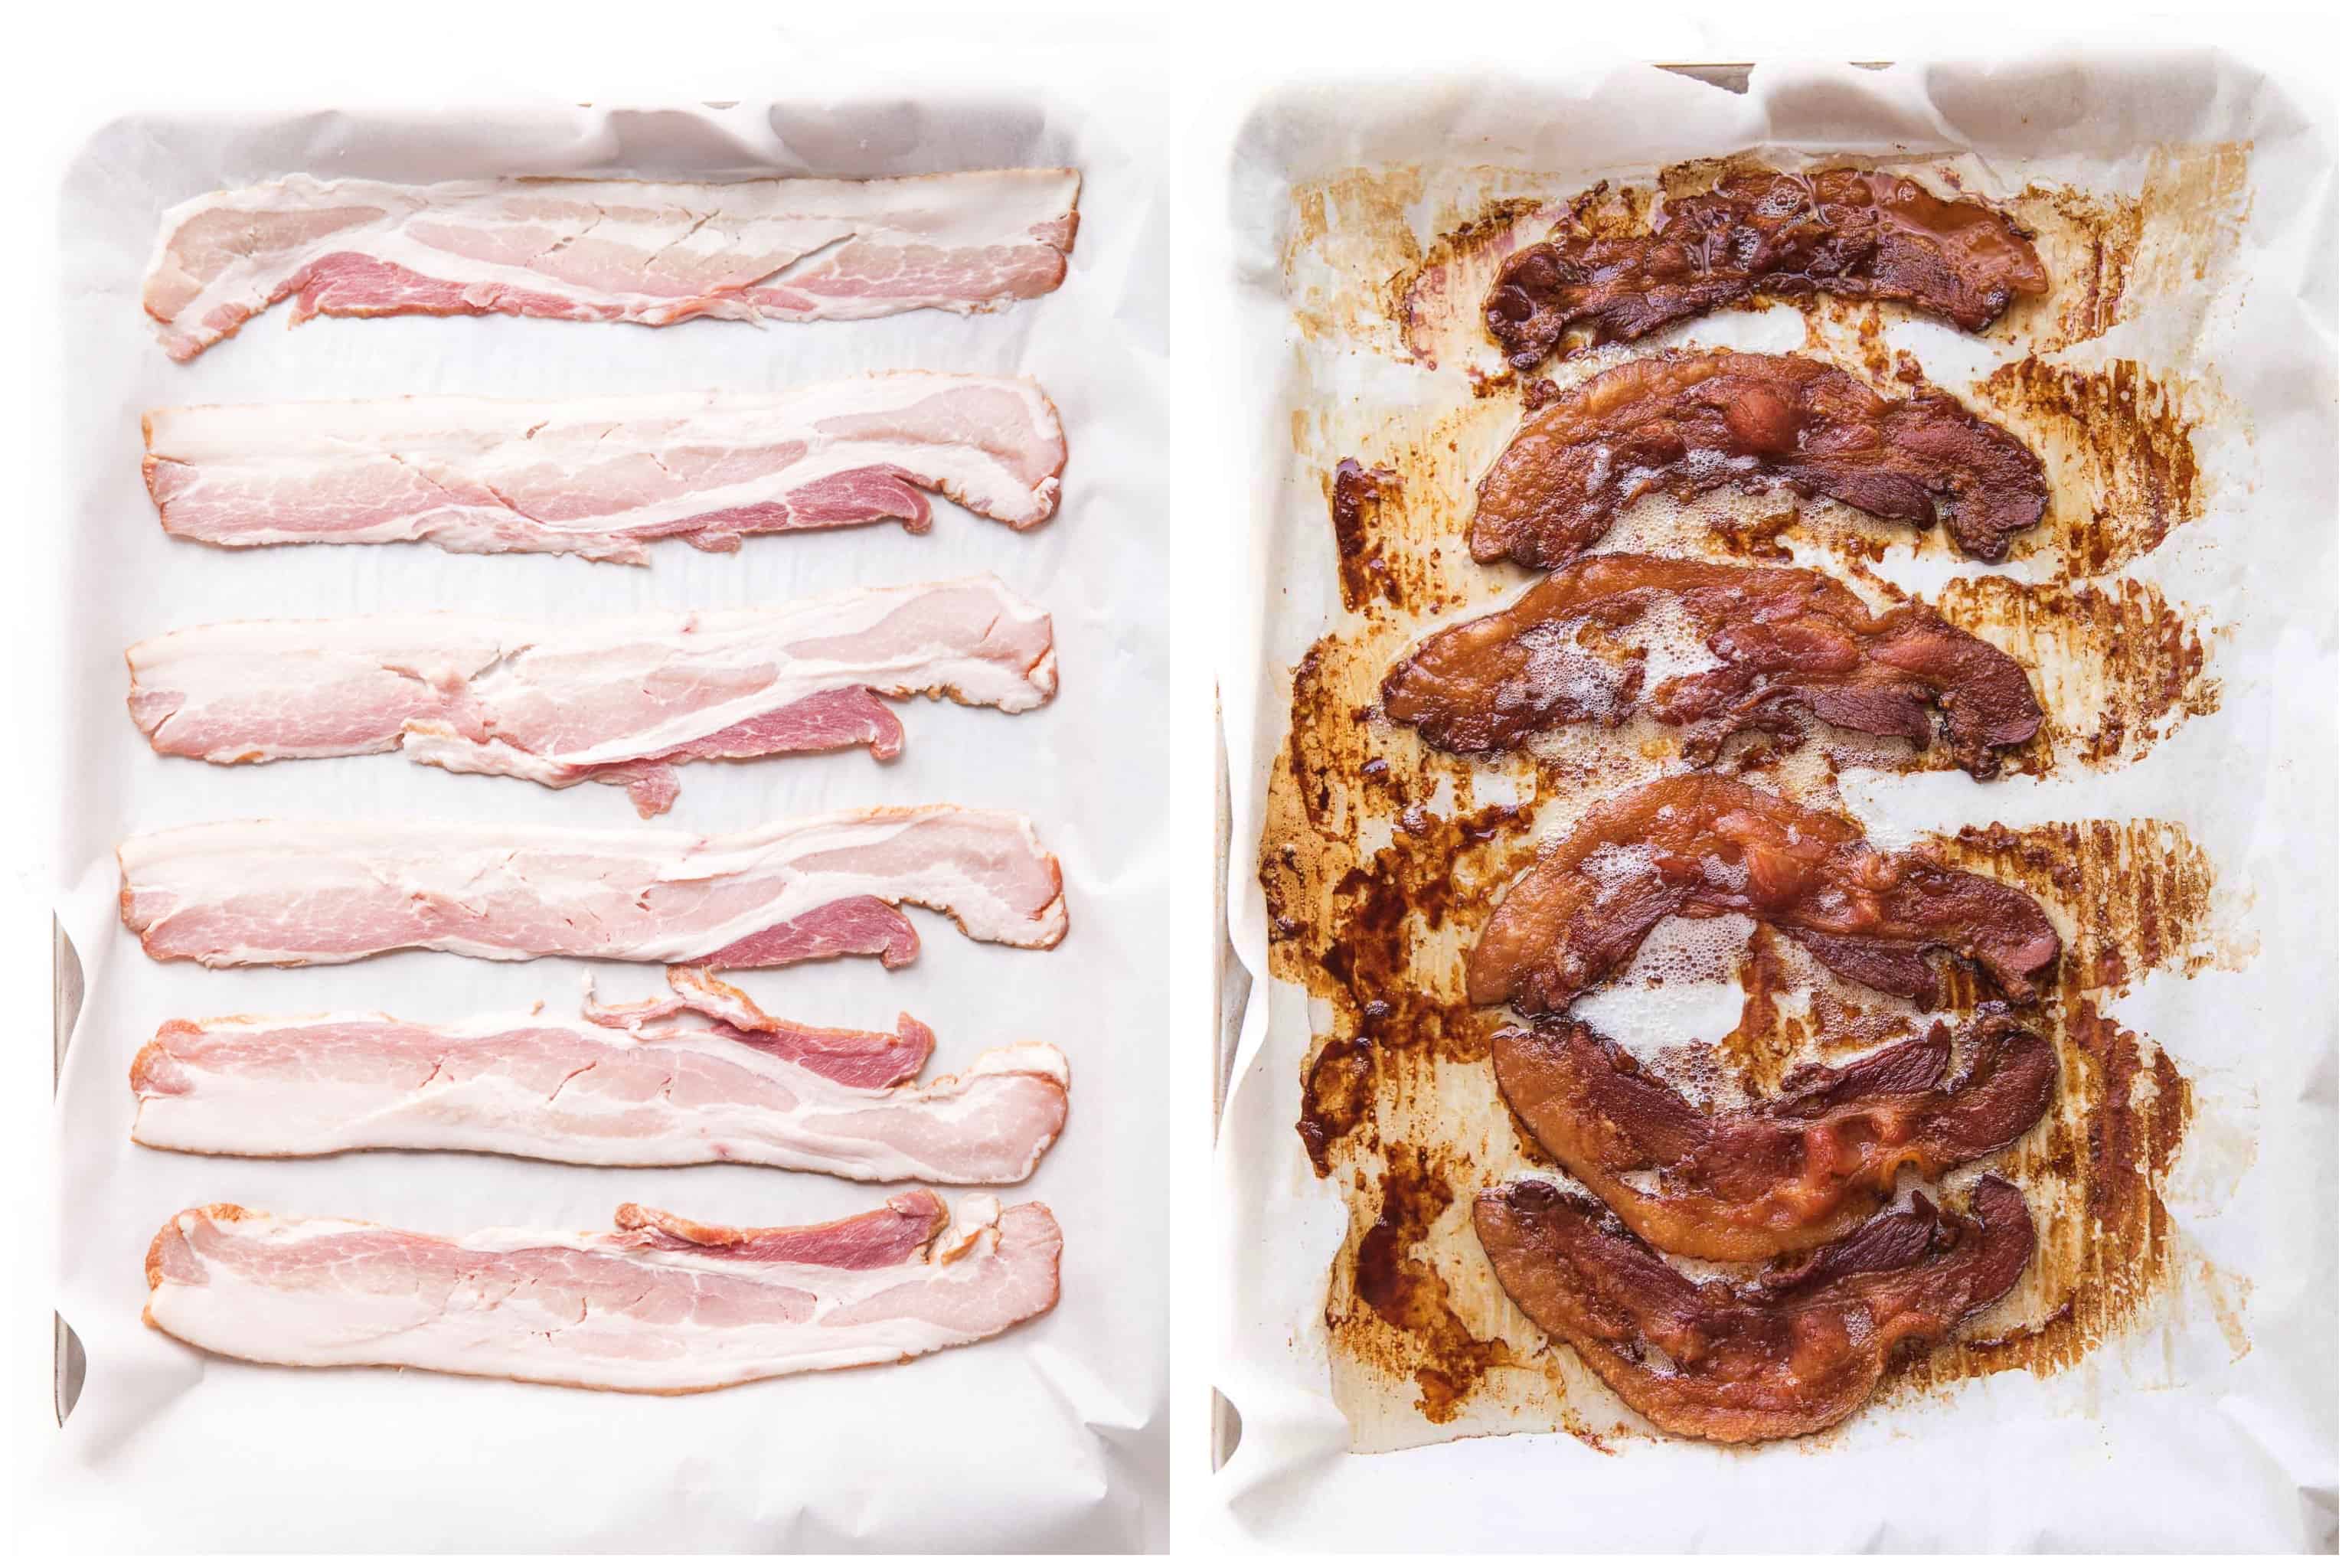 side by side of uncooked bacon and cooked bacon